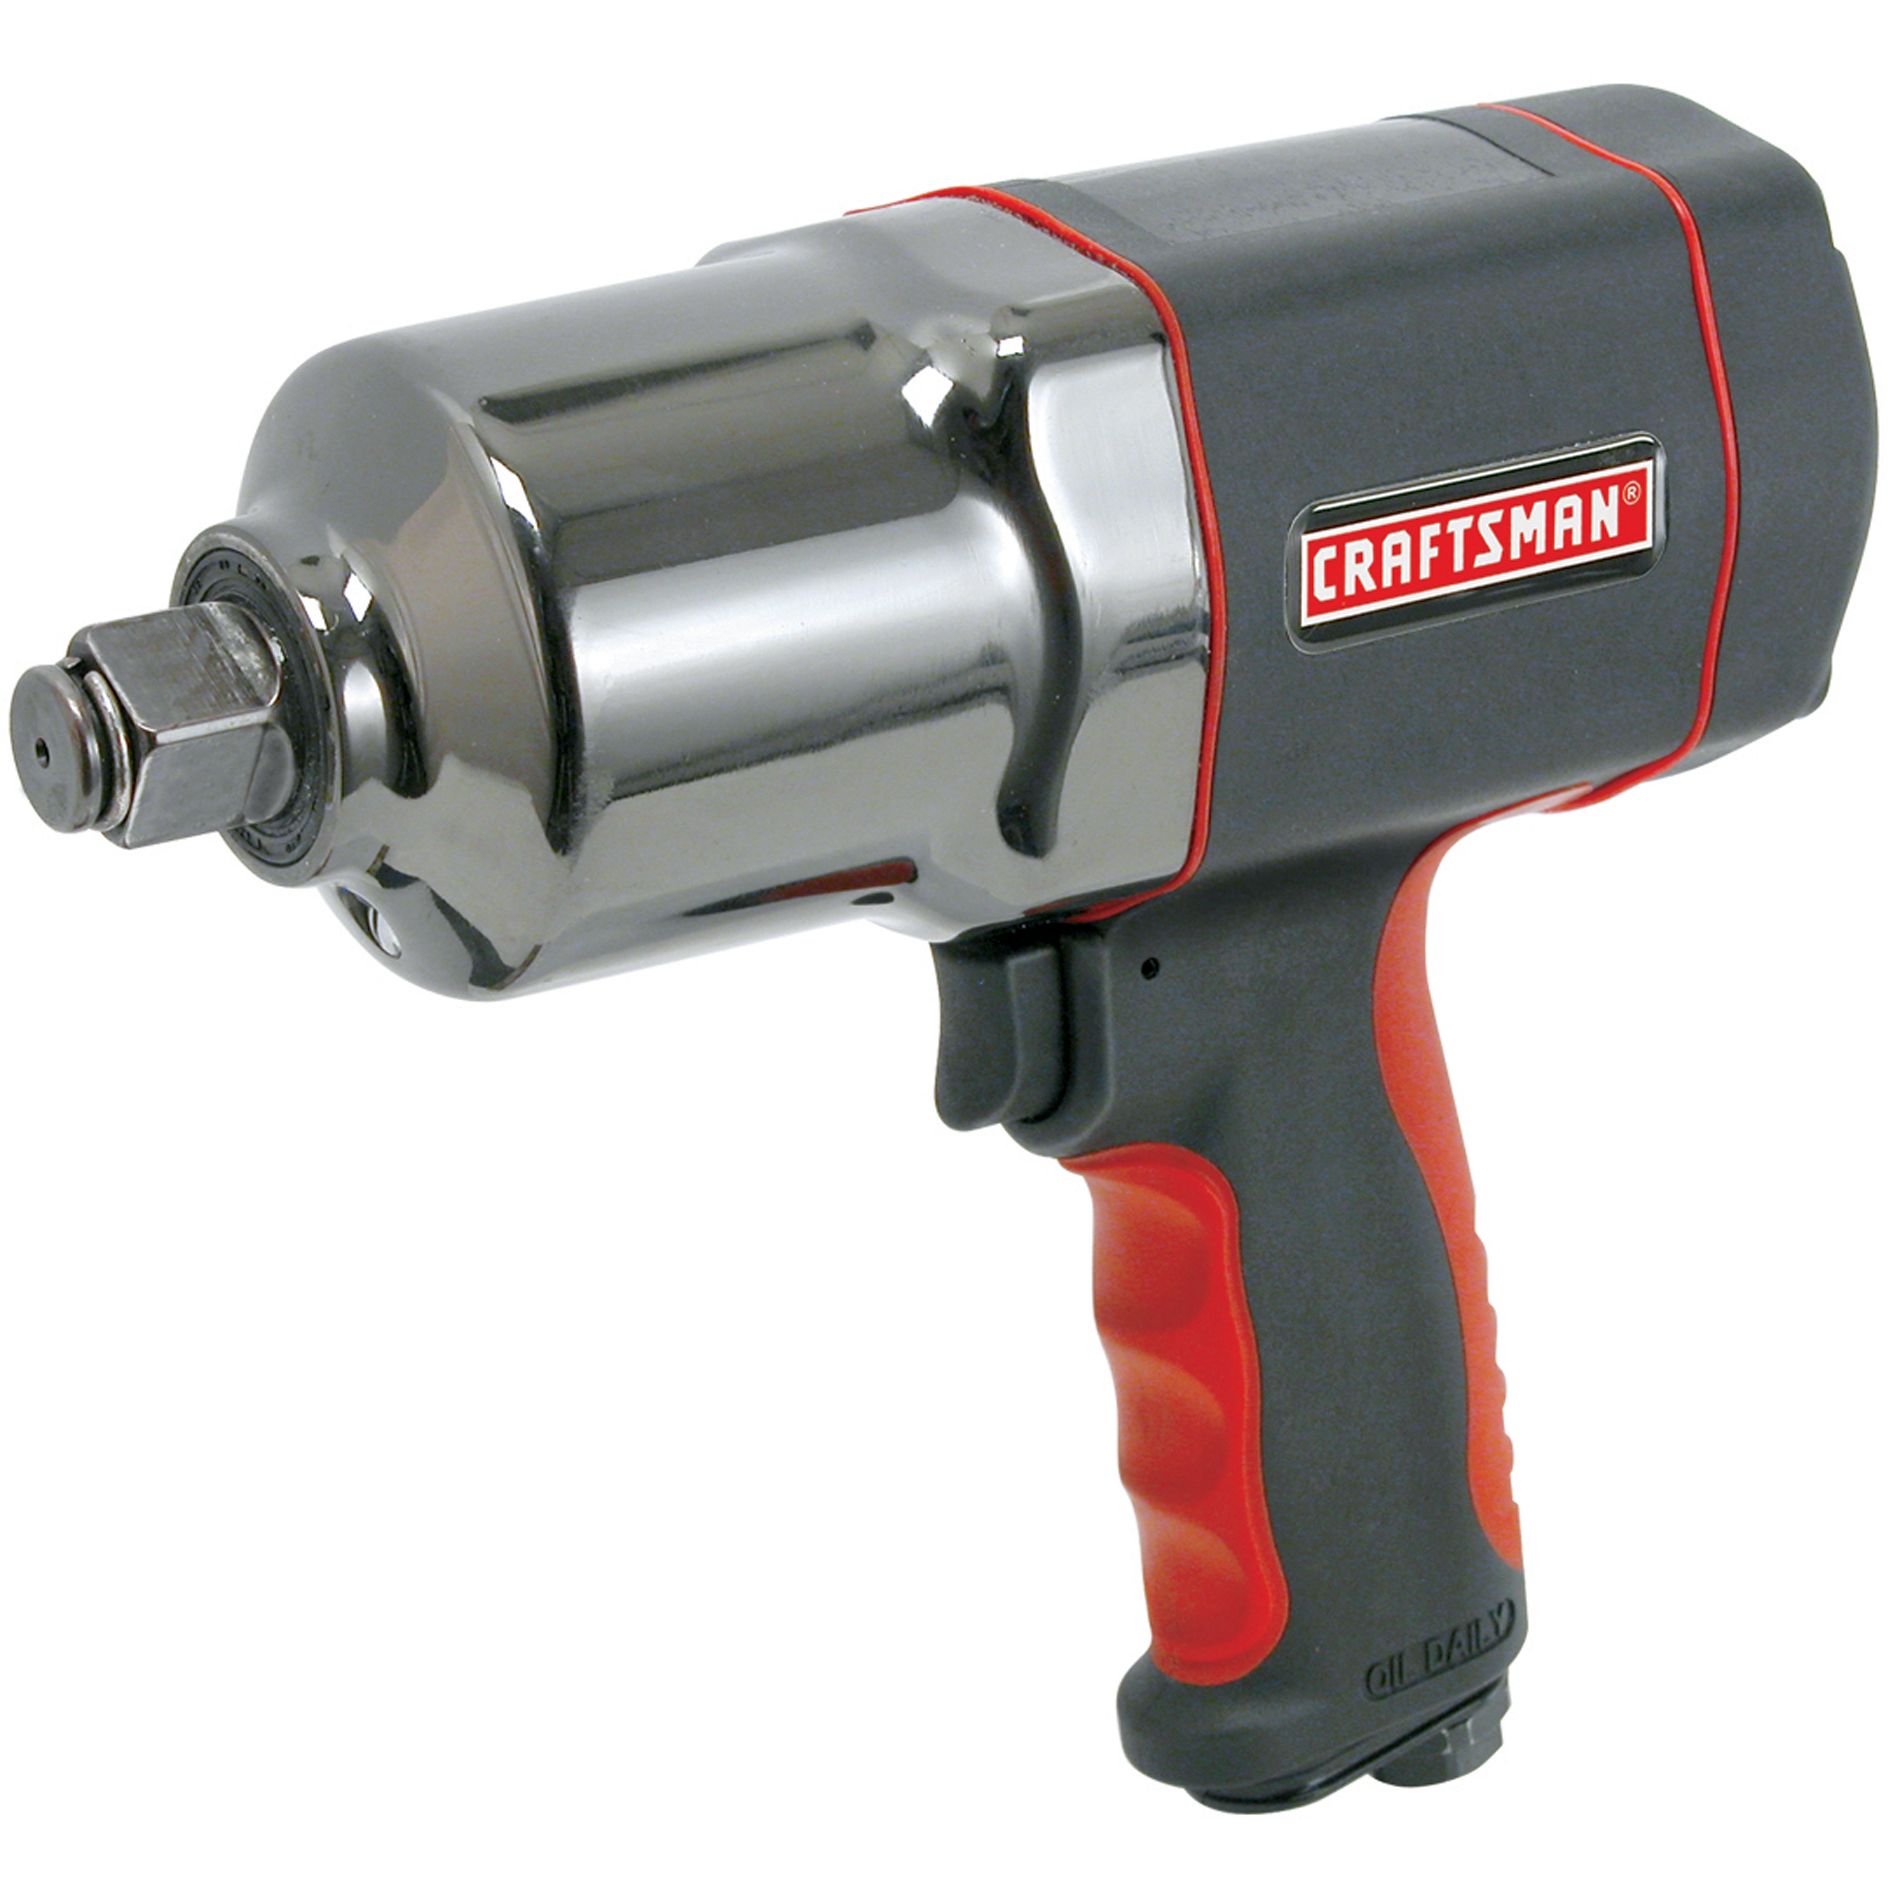 Craftsman 1/2 in. Heavy Duty Impact Wrench